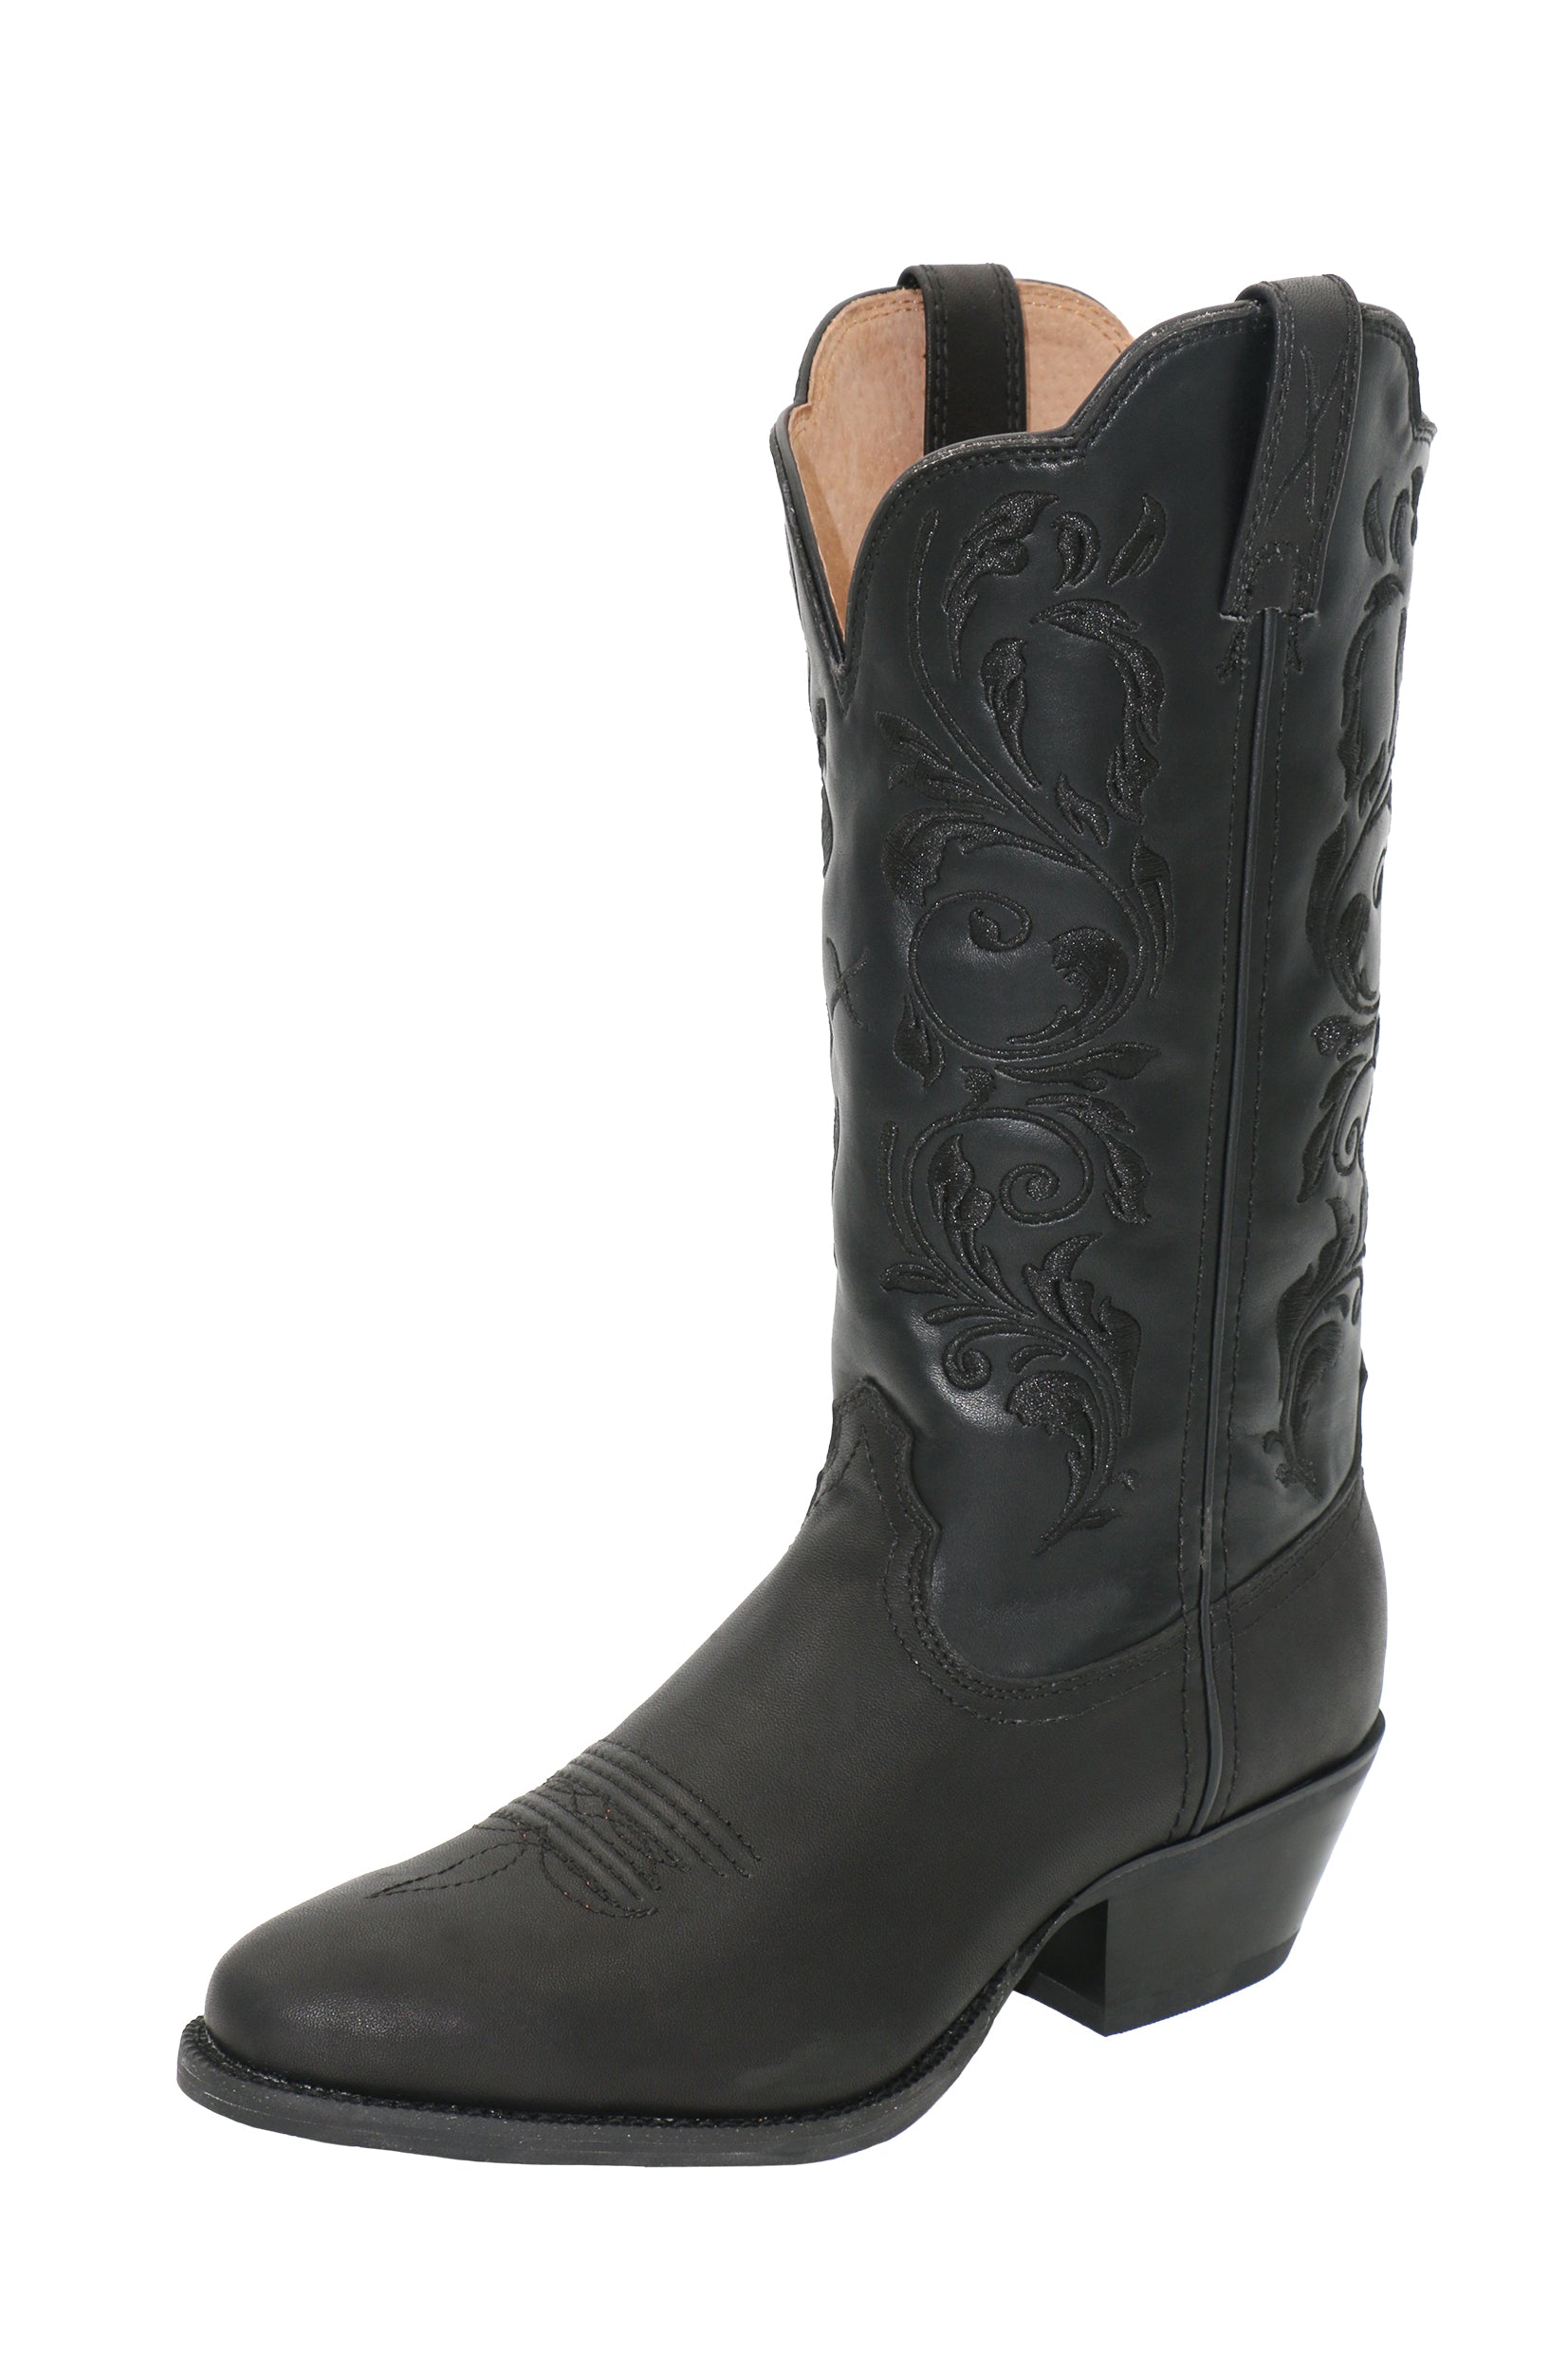 Twisted X Wmns 12 Western Boot